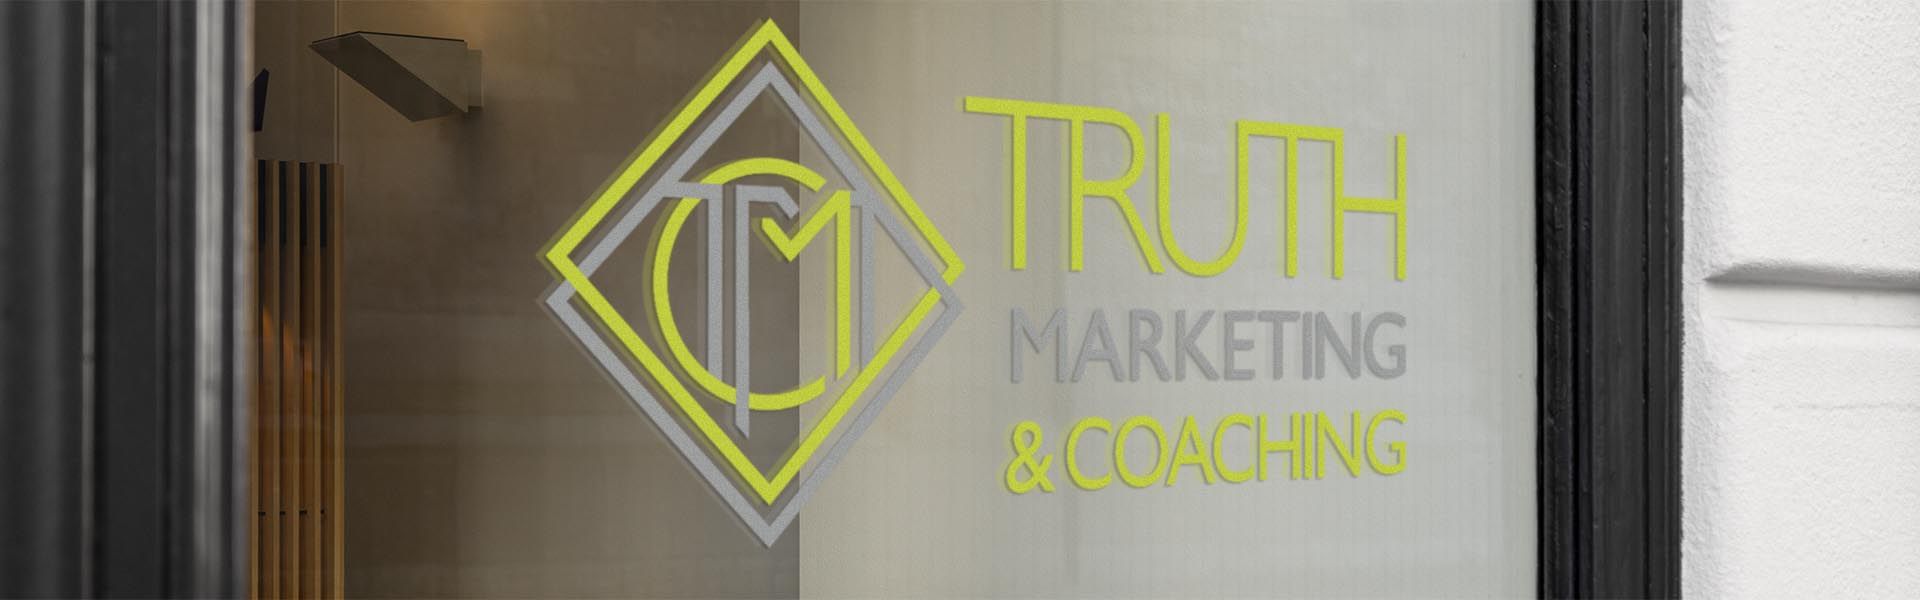 a vinyl window sign that says truth marketing and coaching on it